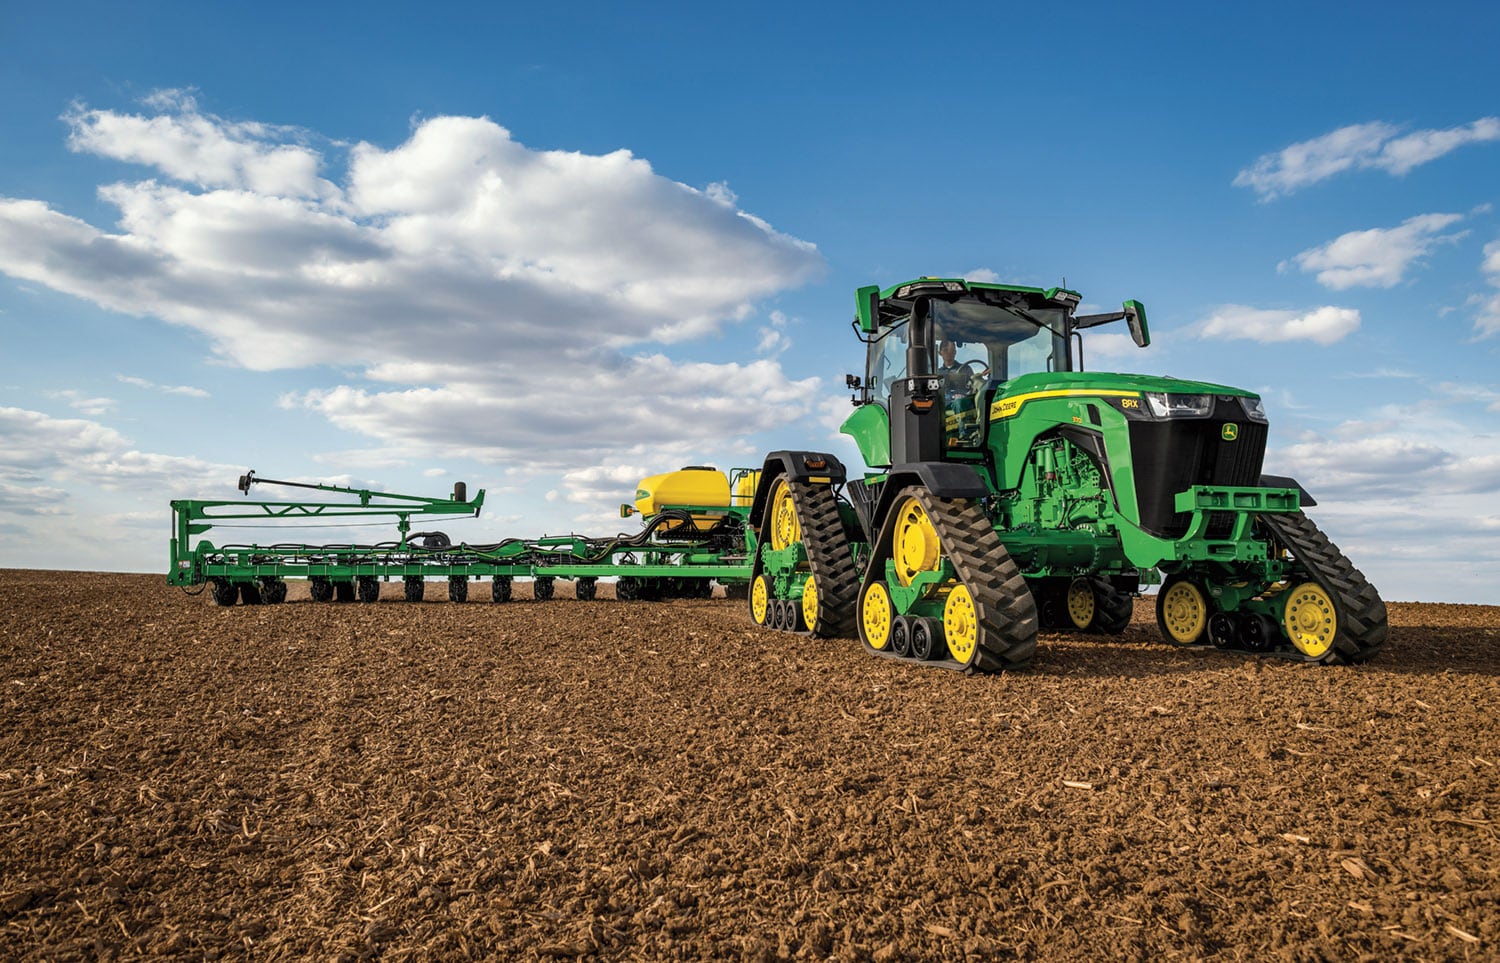 The 8RX 370 is precision-ag ready from the factory to prepare precise seedbeds, and to manage variable-rate seeding and fertilizer prescriptions.